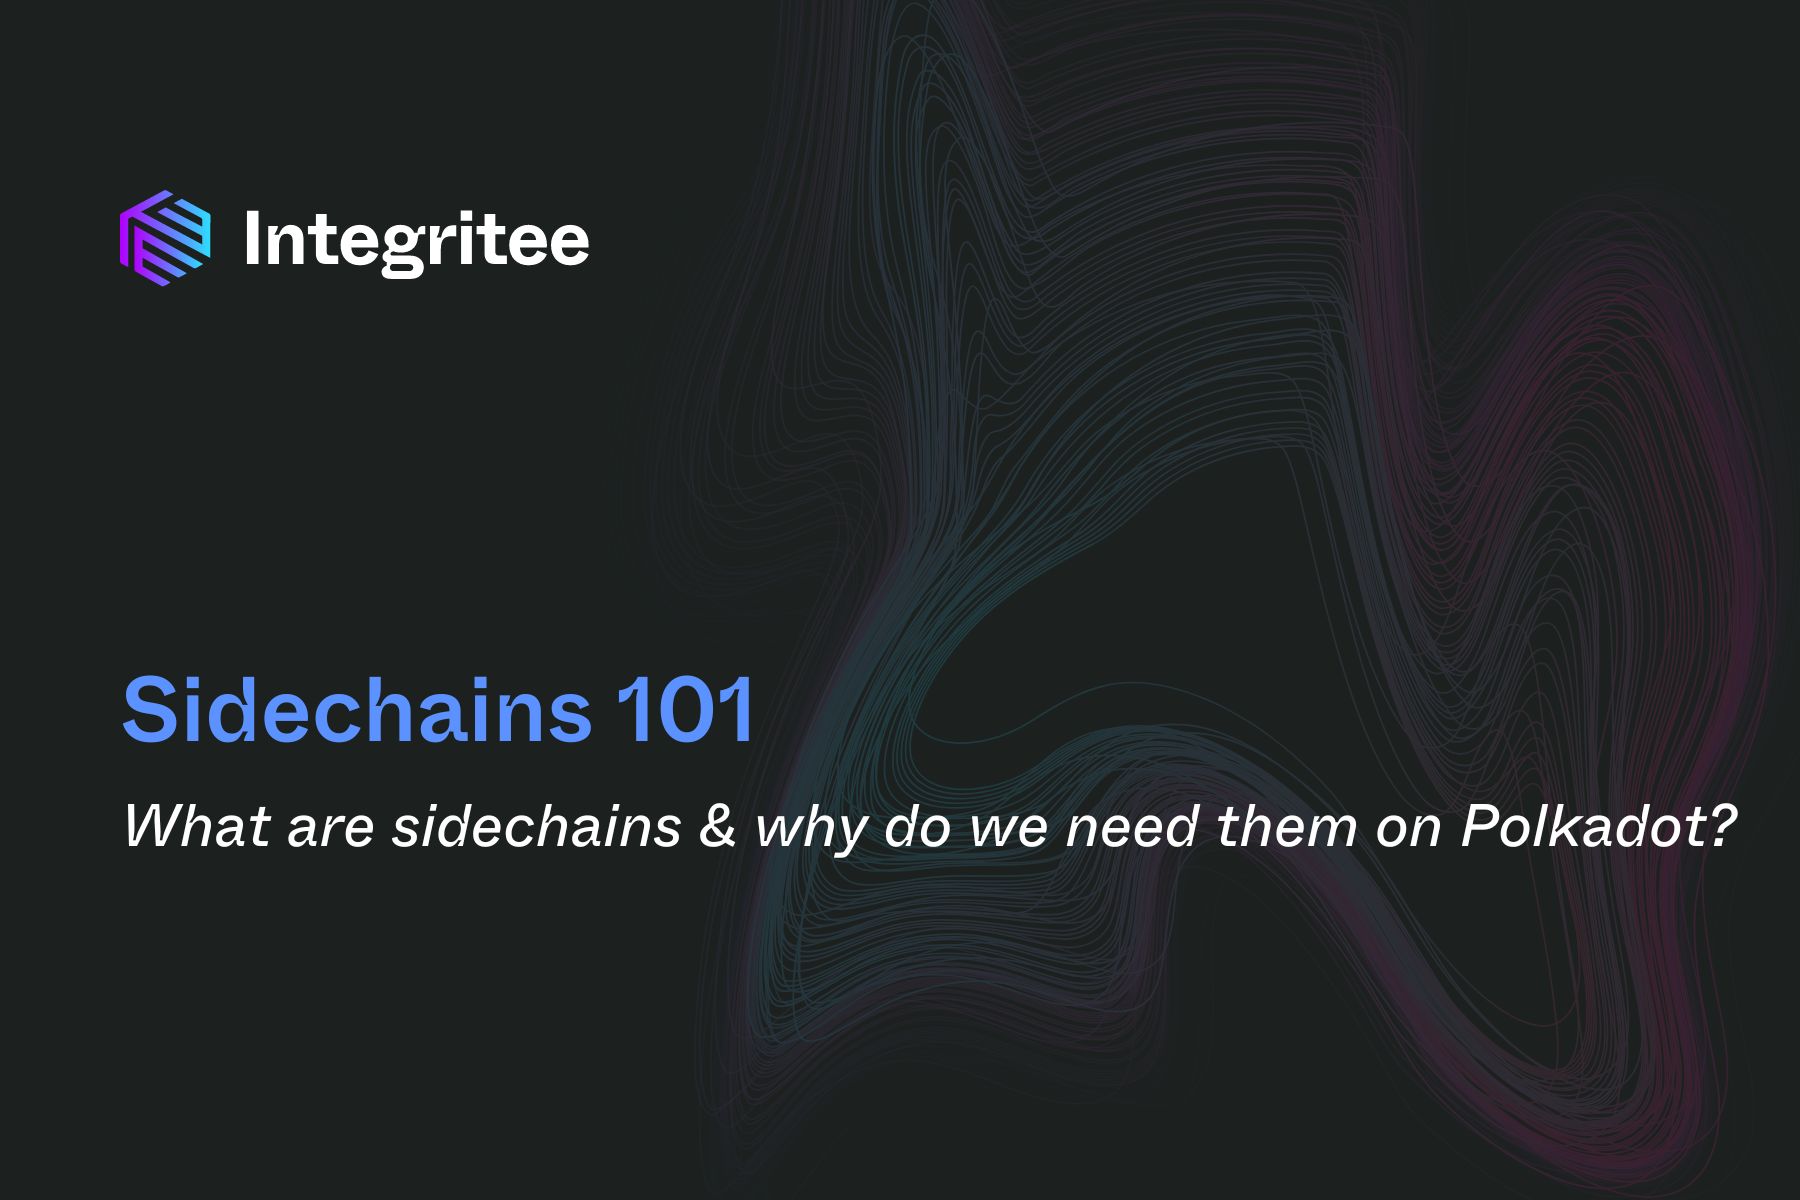 Sidechain 101: What are sidechains and why do we need them on Polkadot?